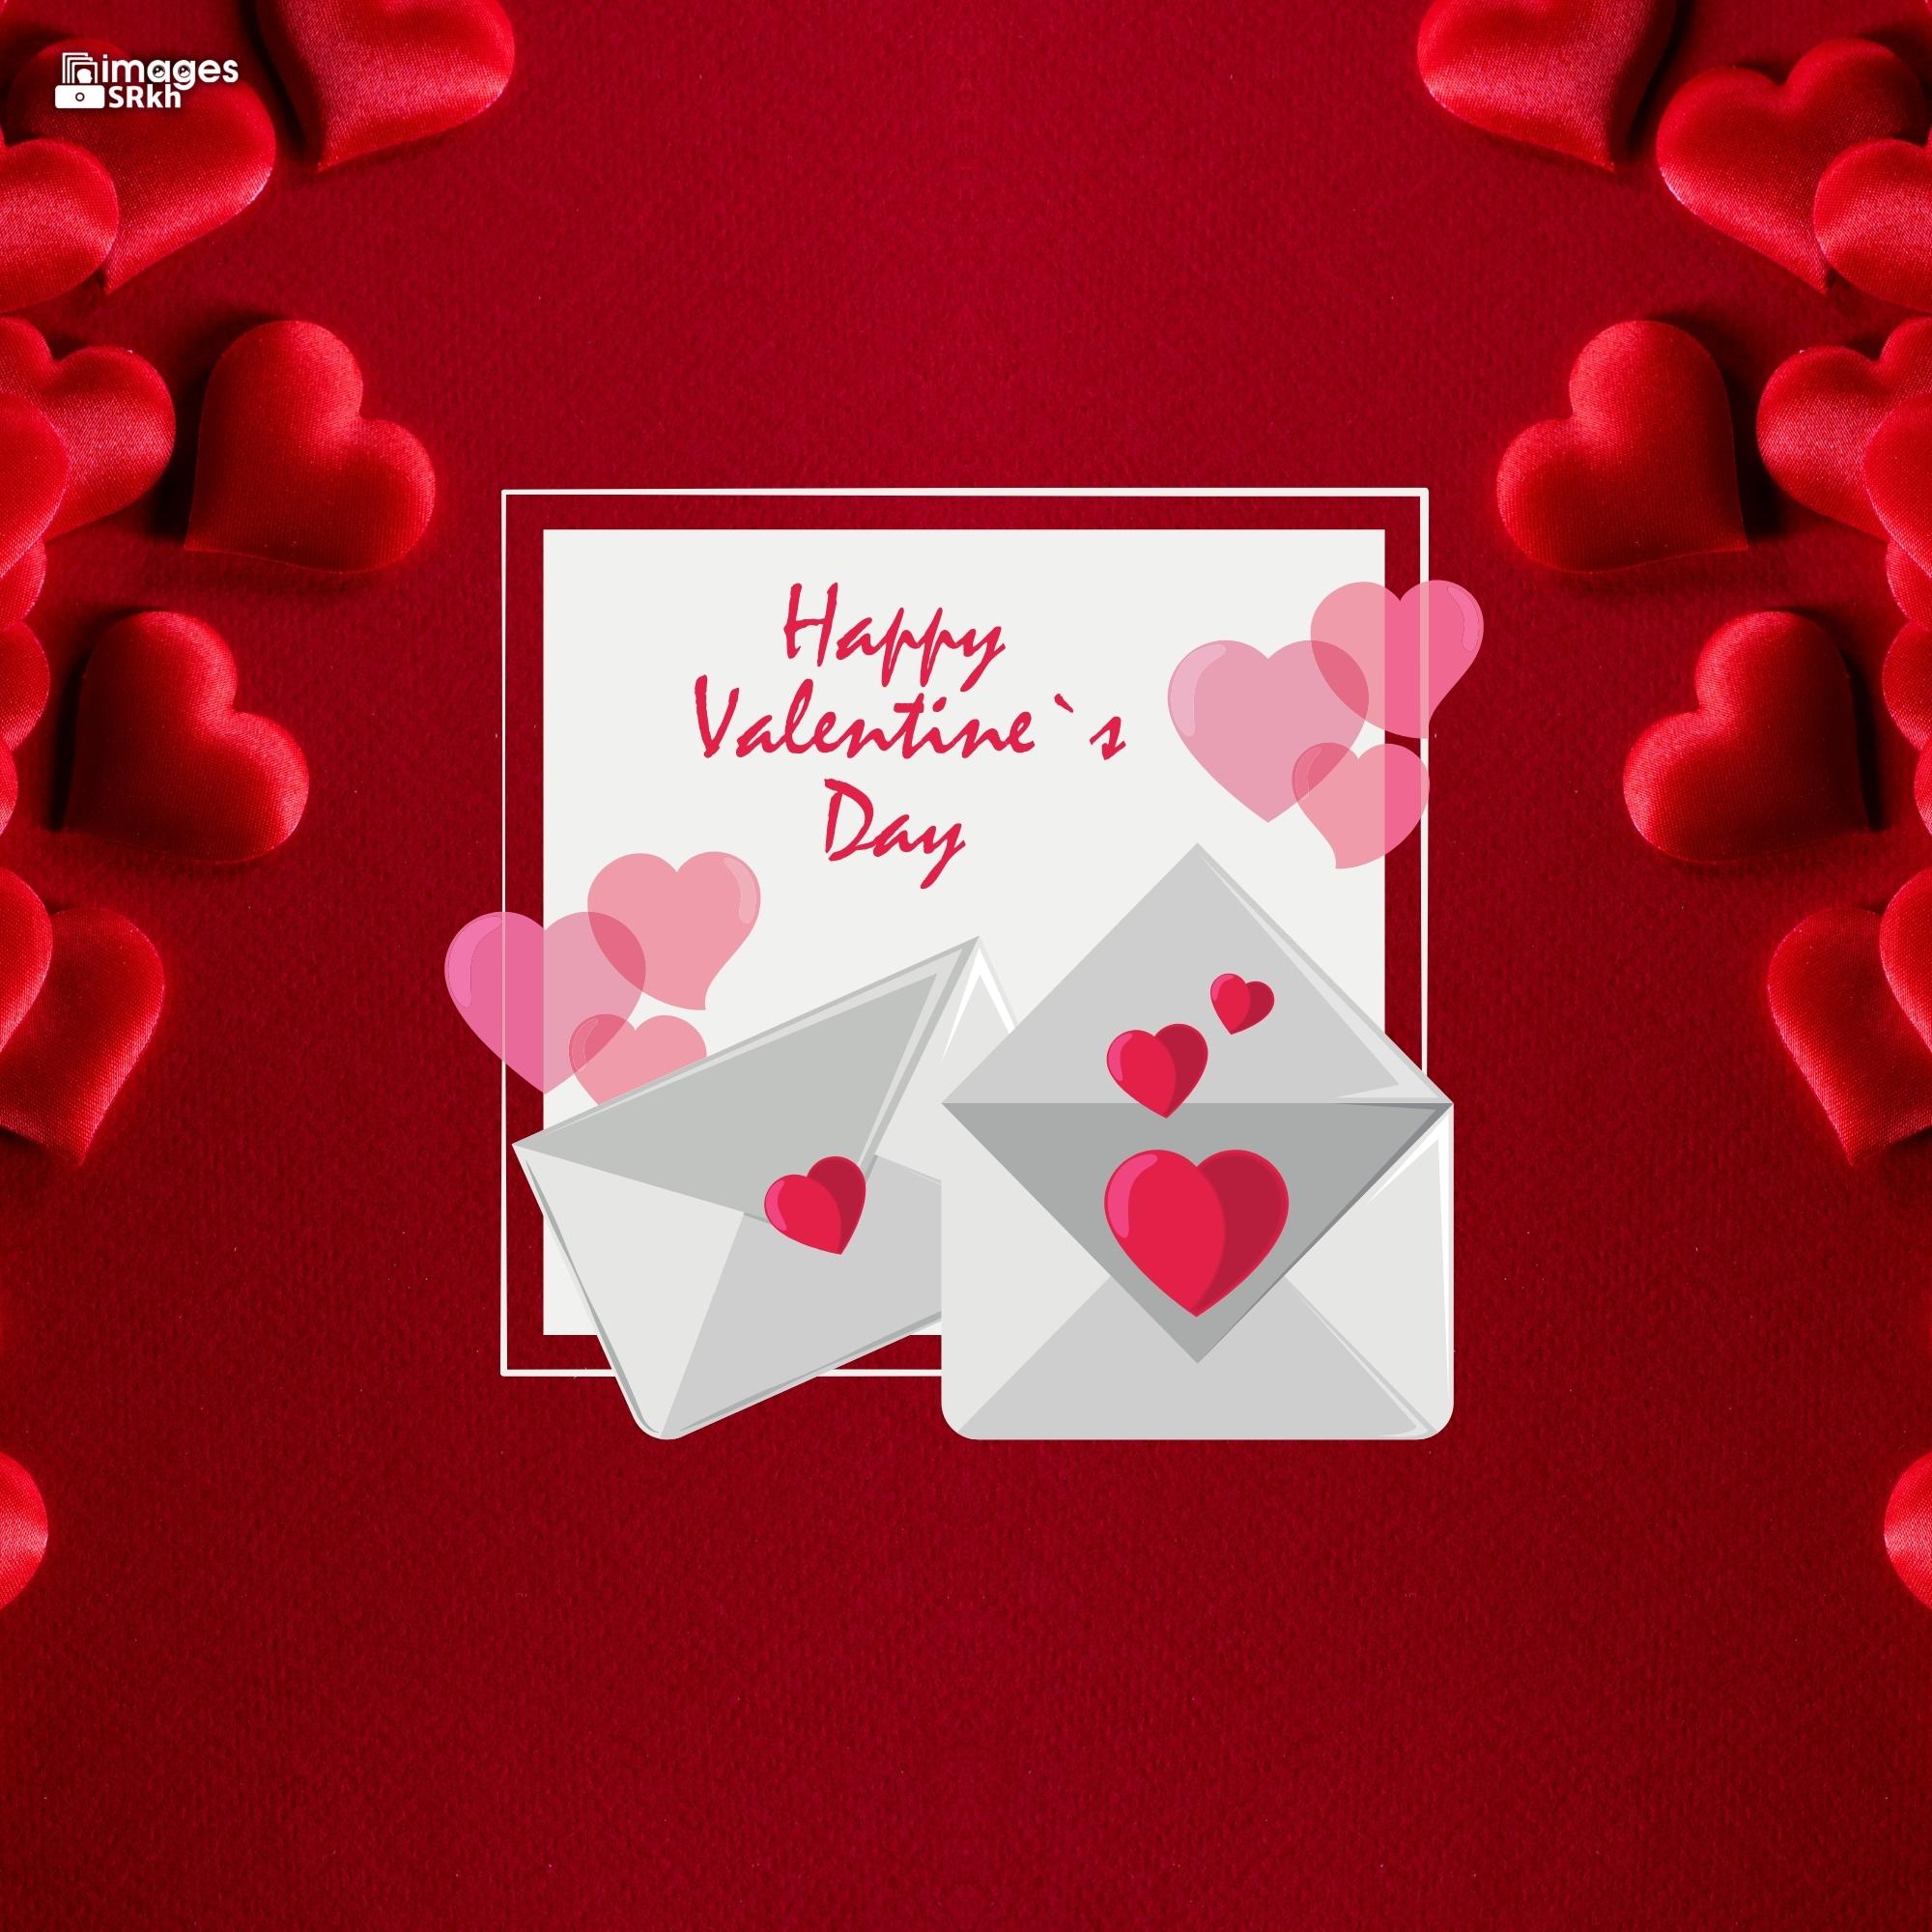 Happy Valentines Day | 540 | PREMIUM IMAGES | Wishes for Love